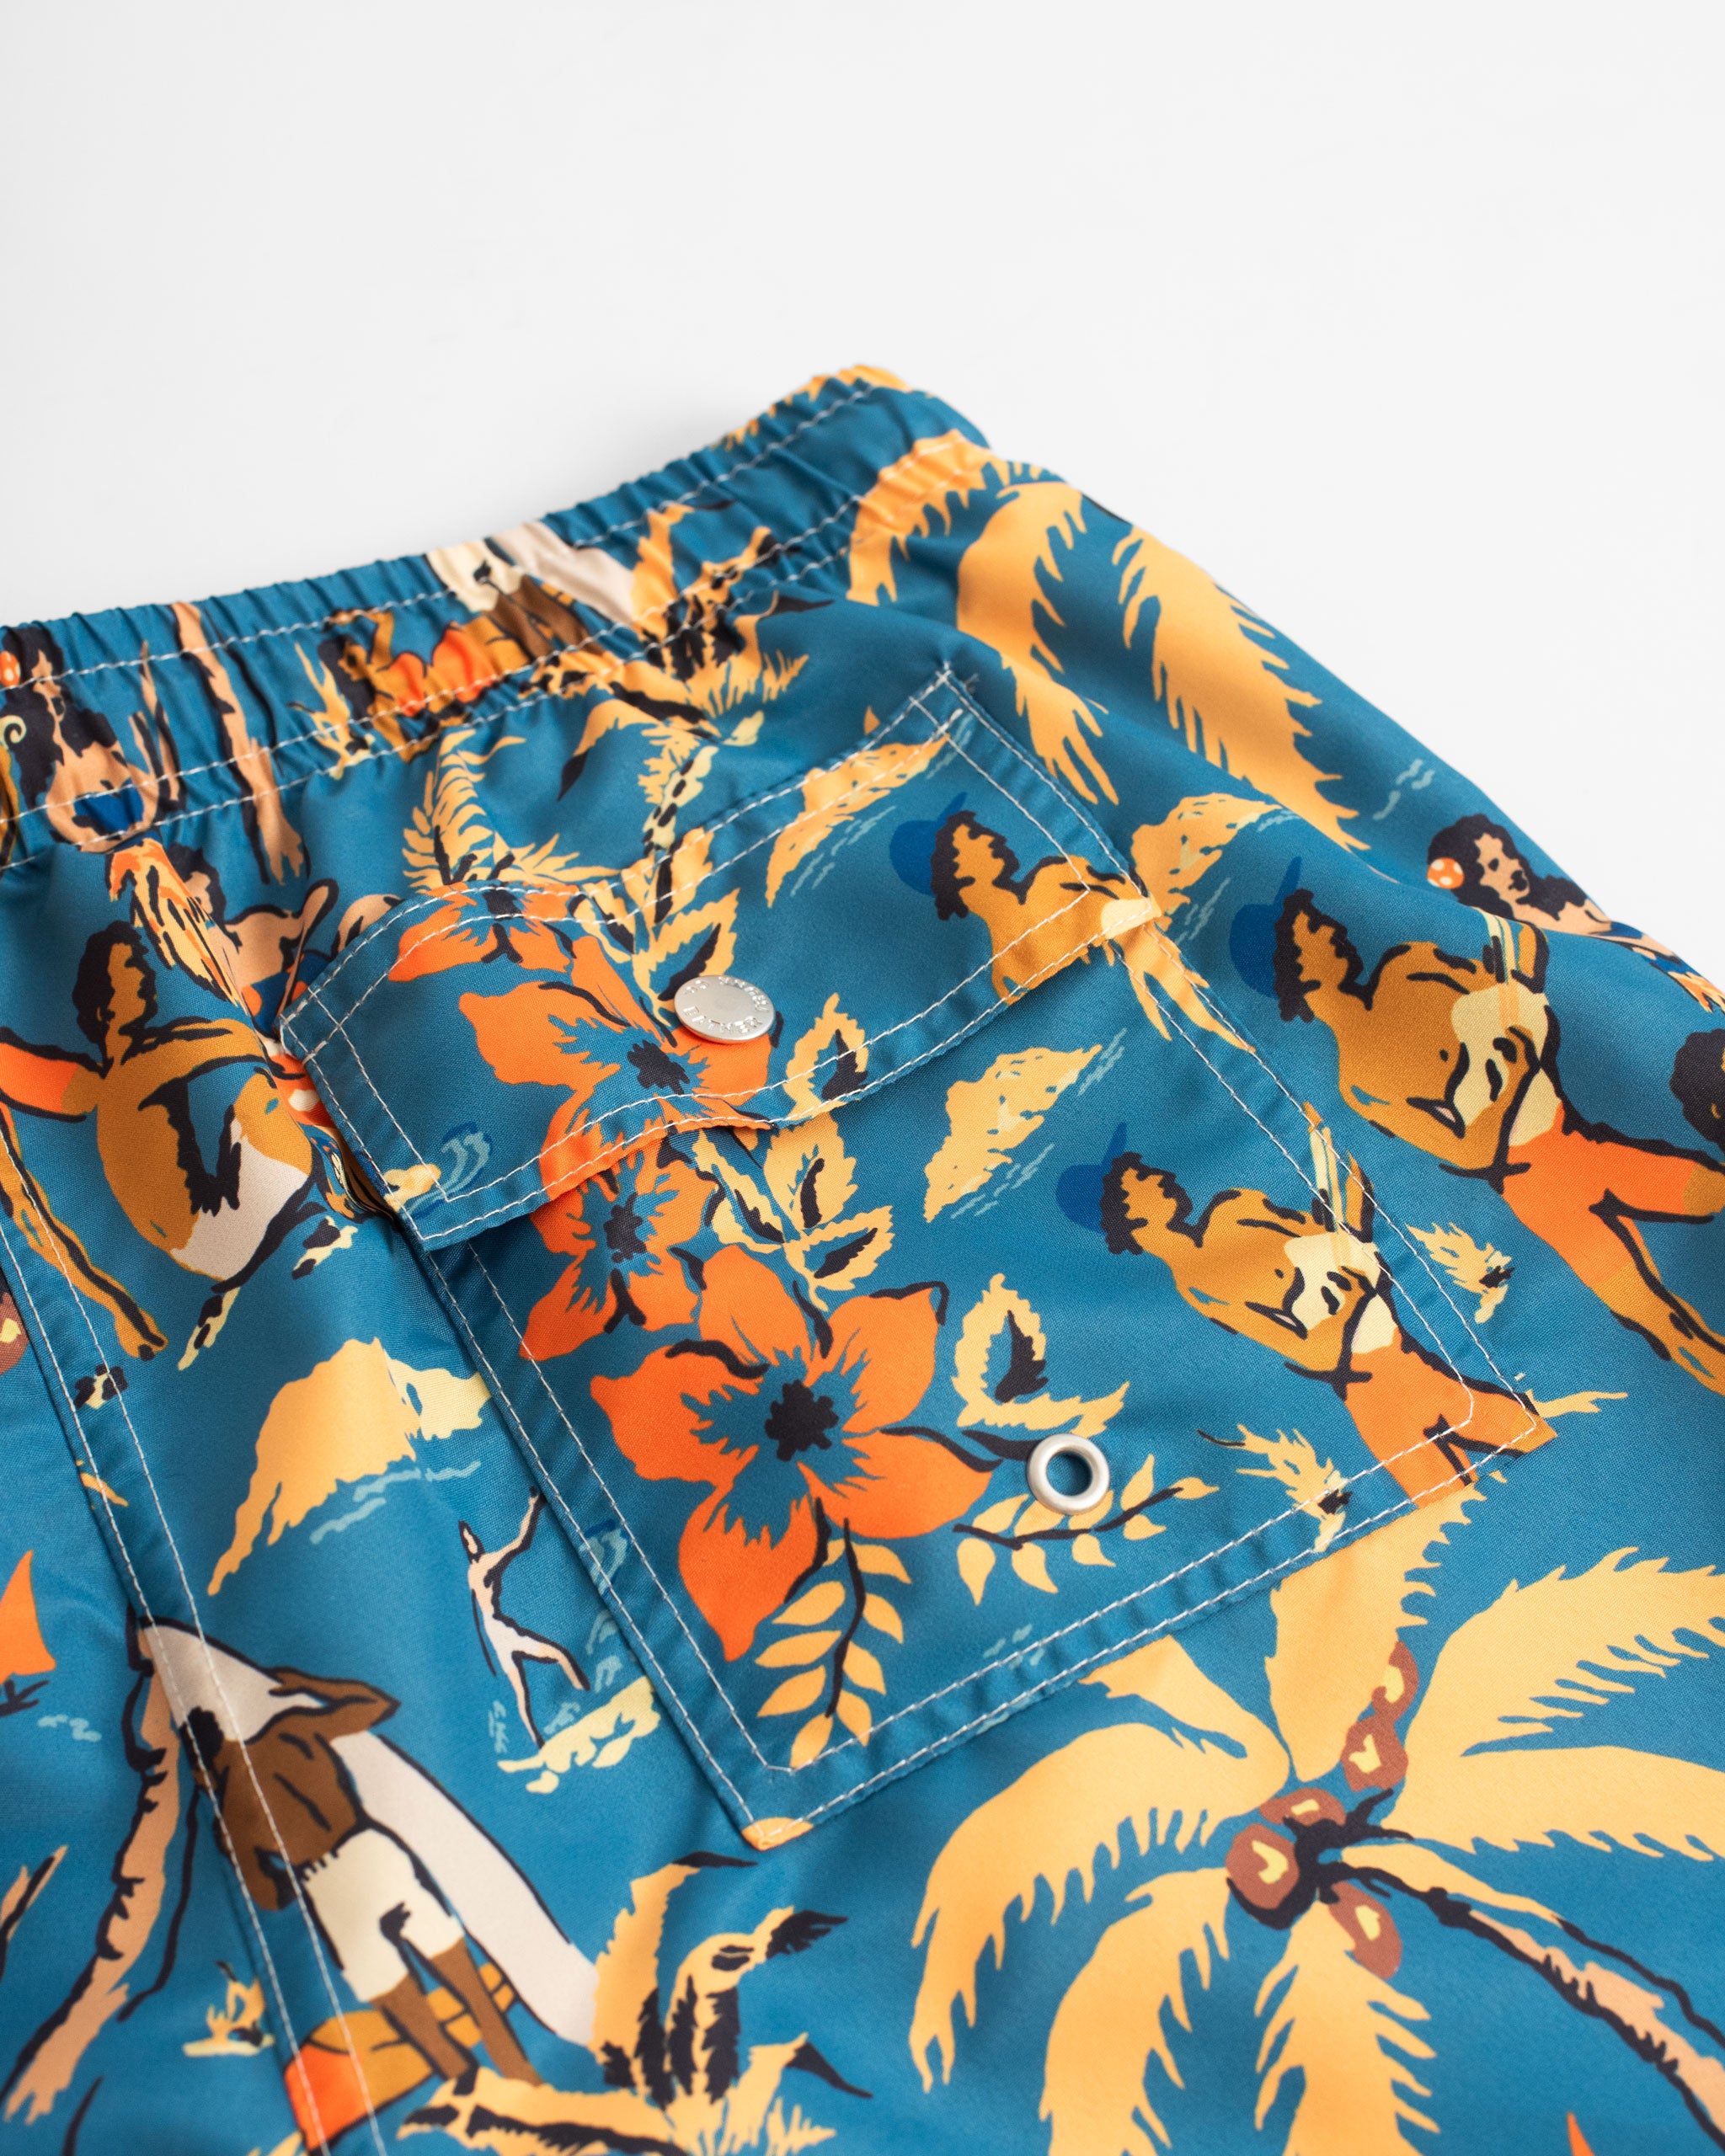 Close up of back pocket on blue swim trunk with Hawaiian-inspired printed beach scene